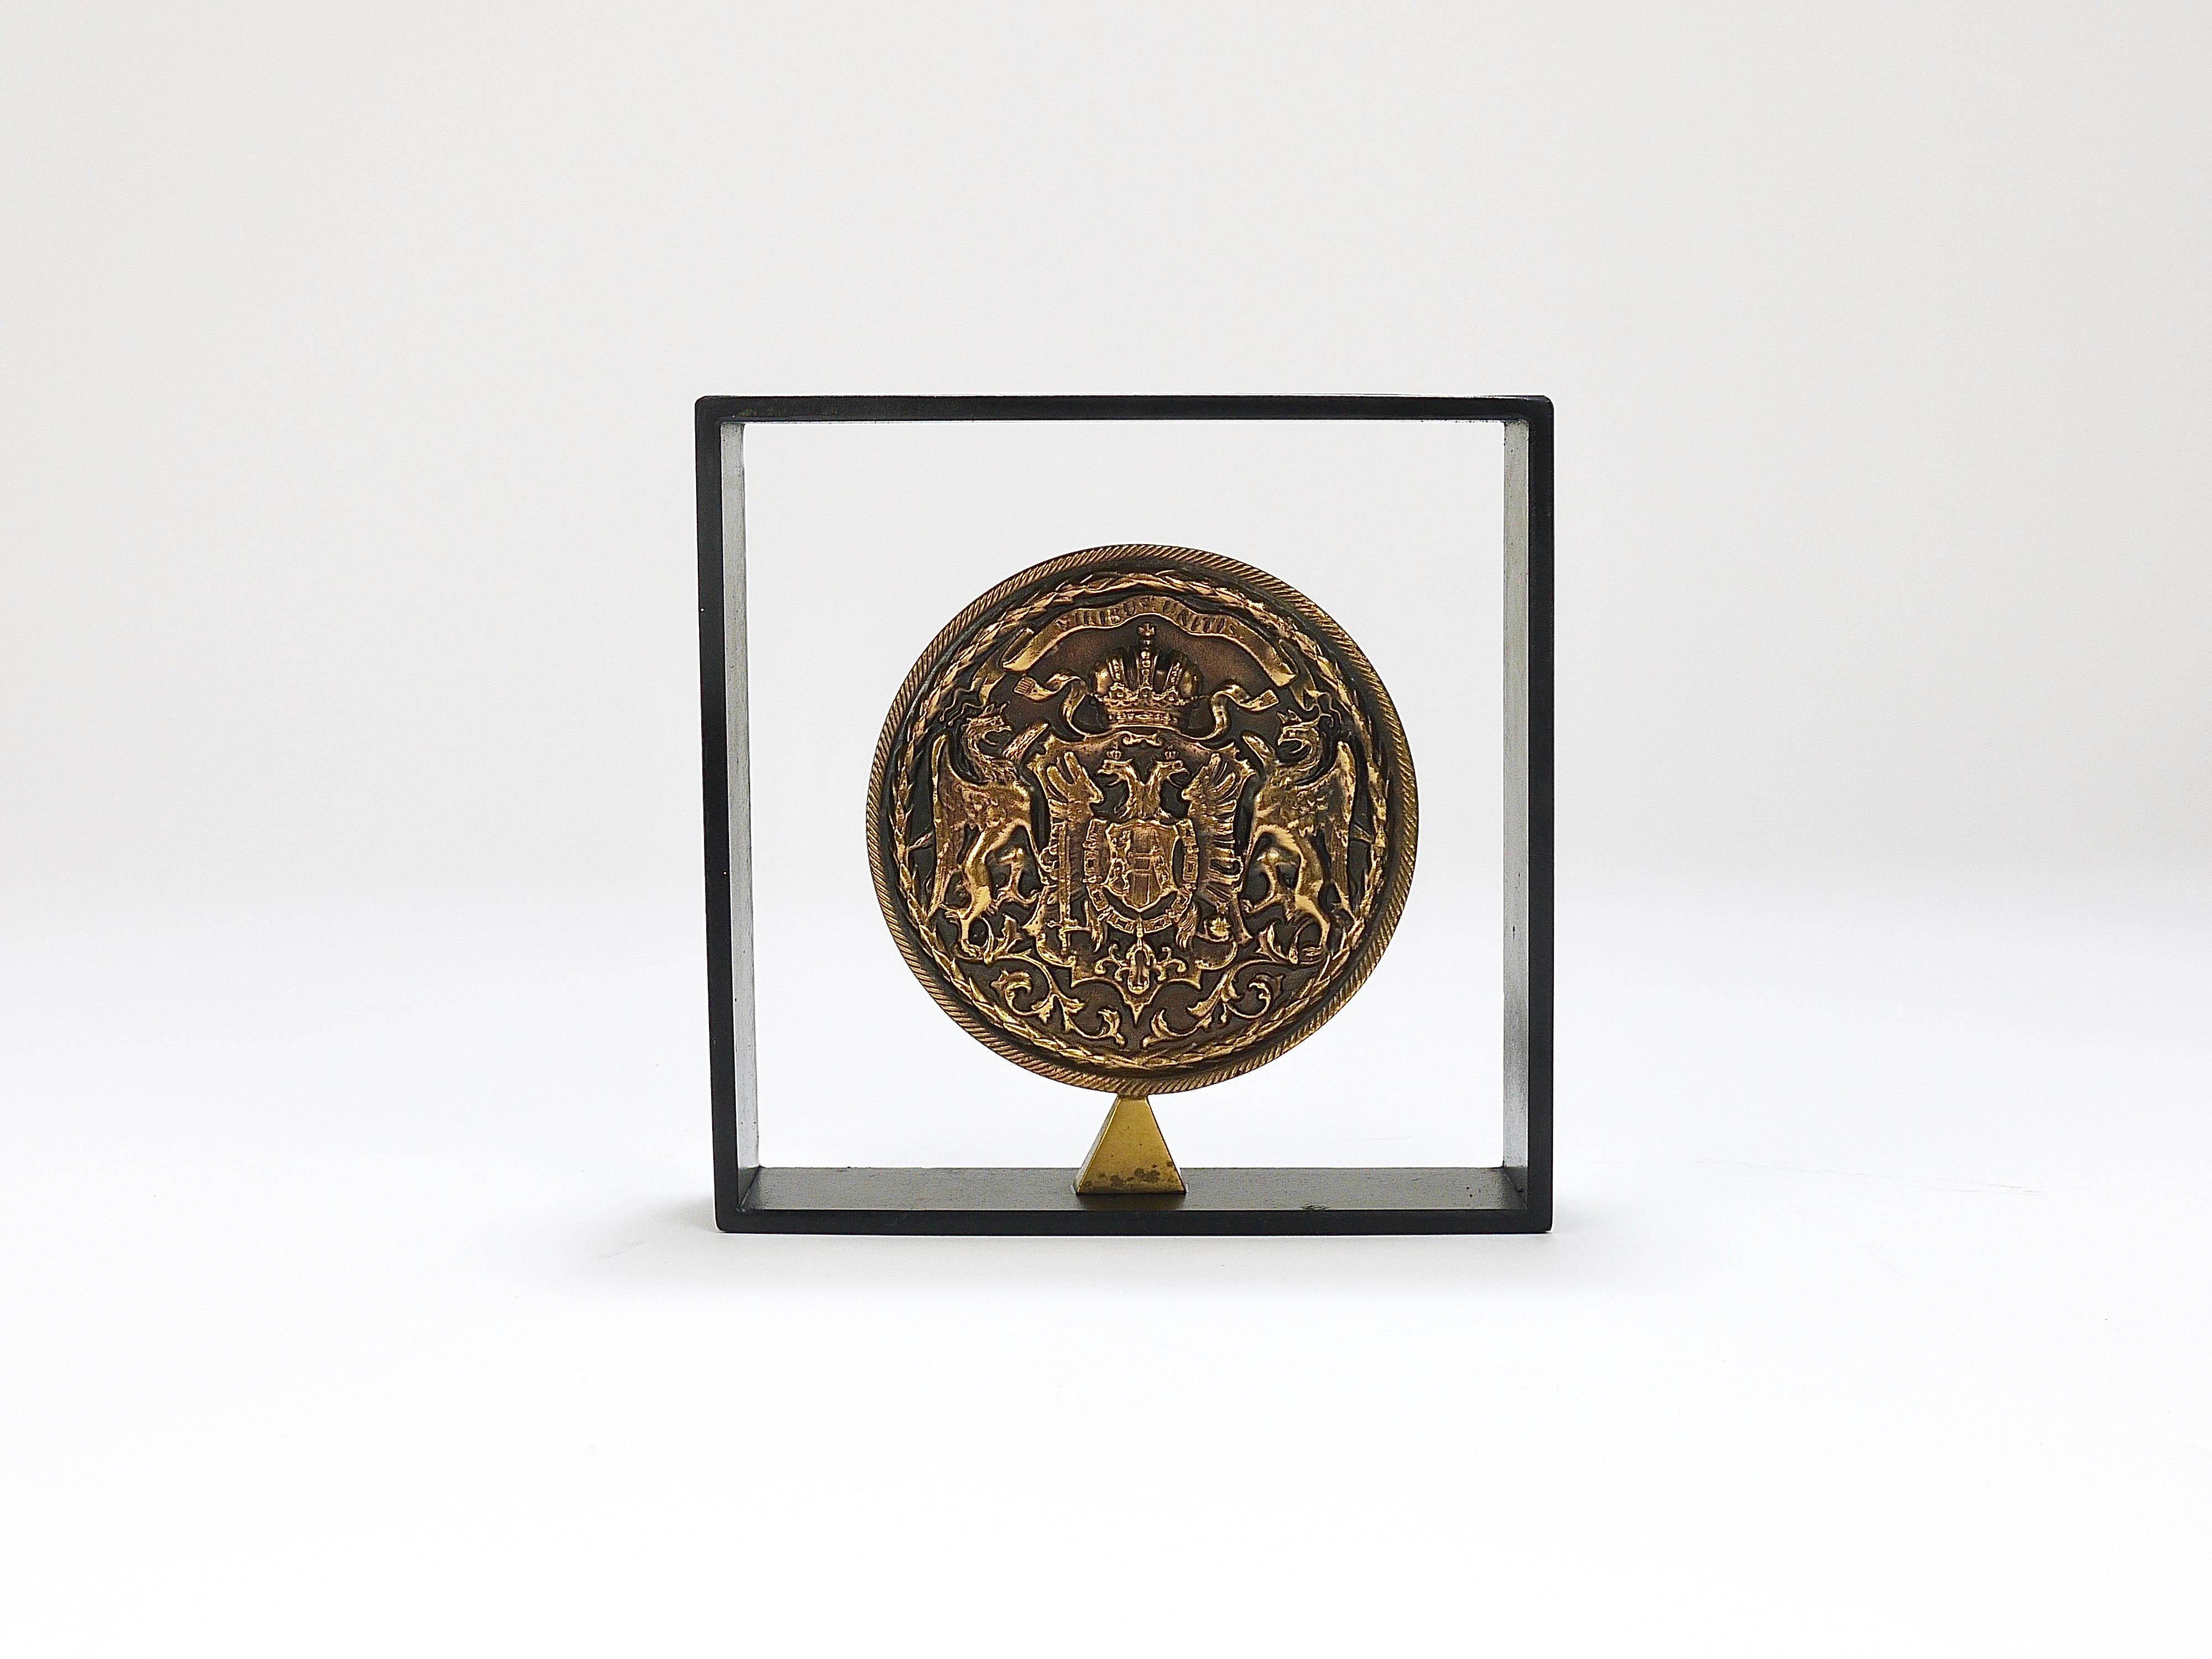 This is a rare modernist book end, designed and manufactured by Carl Auböck III in the 1970s. The bookend consists of a large brass medal, which displays the coat of arms of the house of Habsburgs, the double headed monarchy eagle and the words